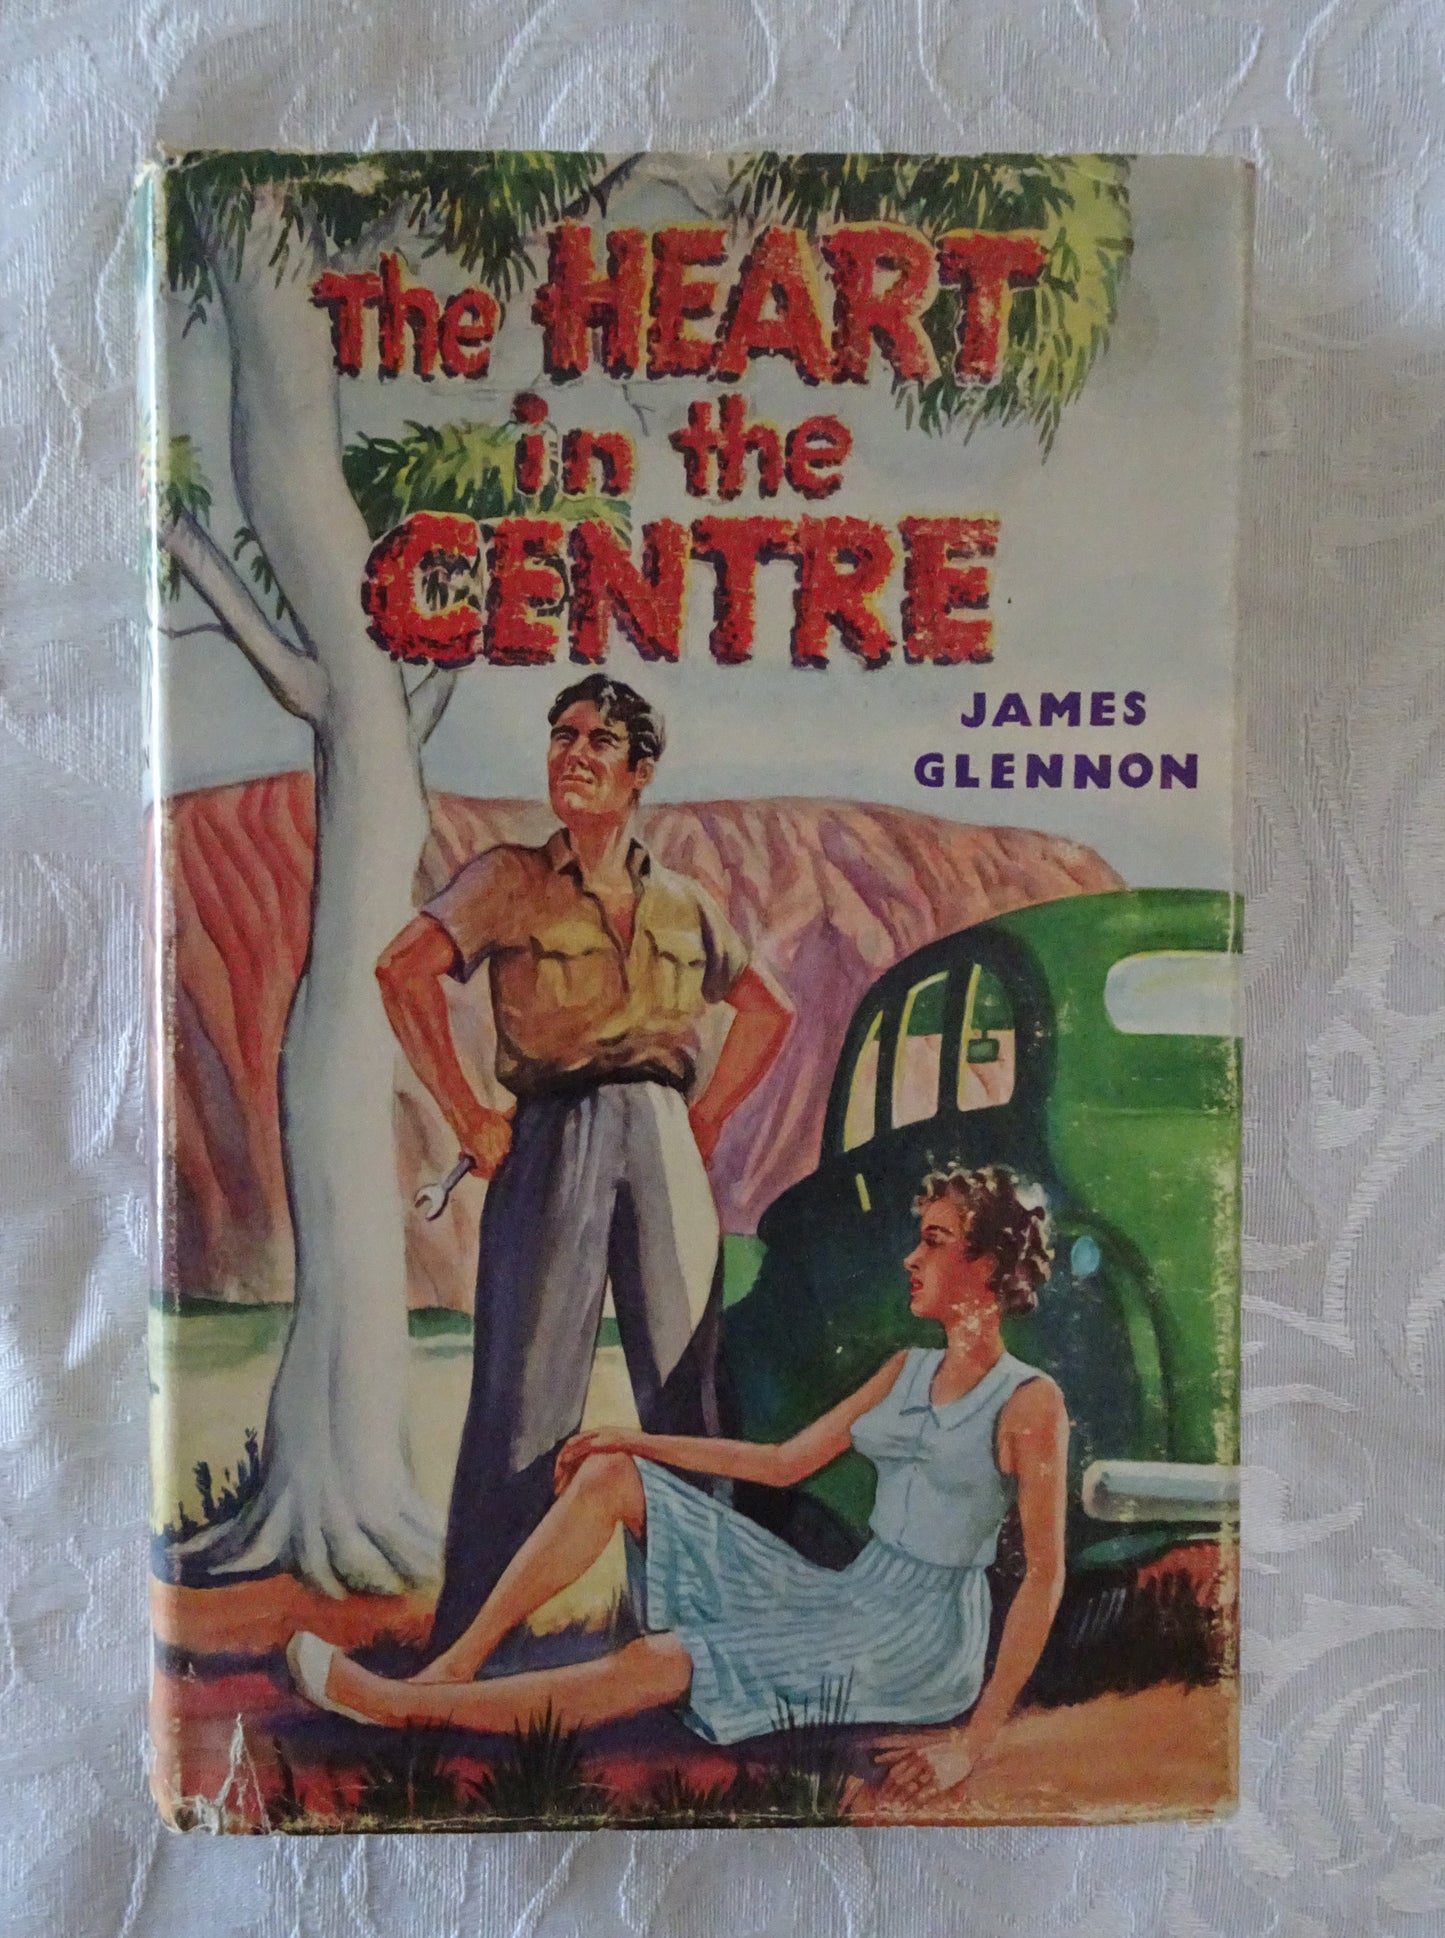 The Heart in the Centre  by James Glennon